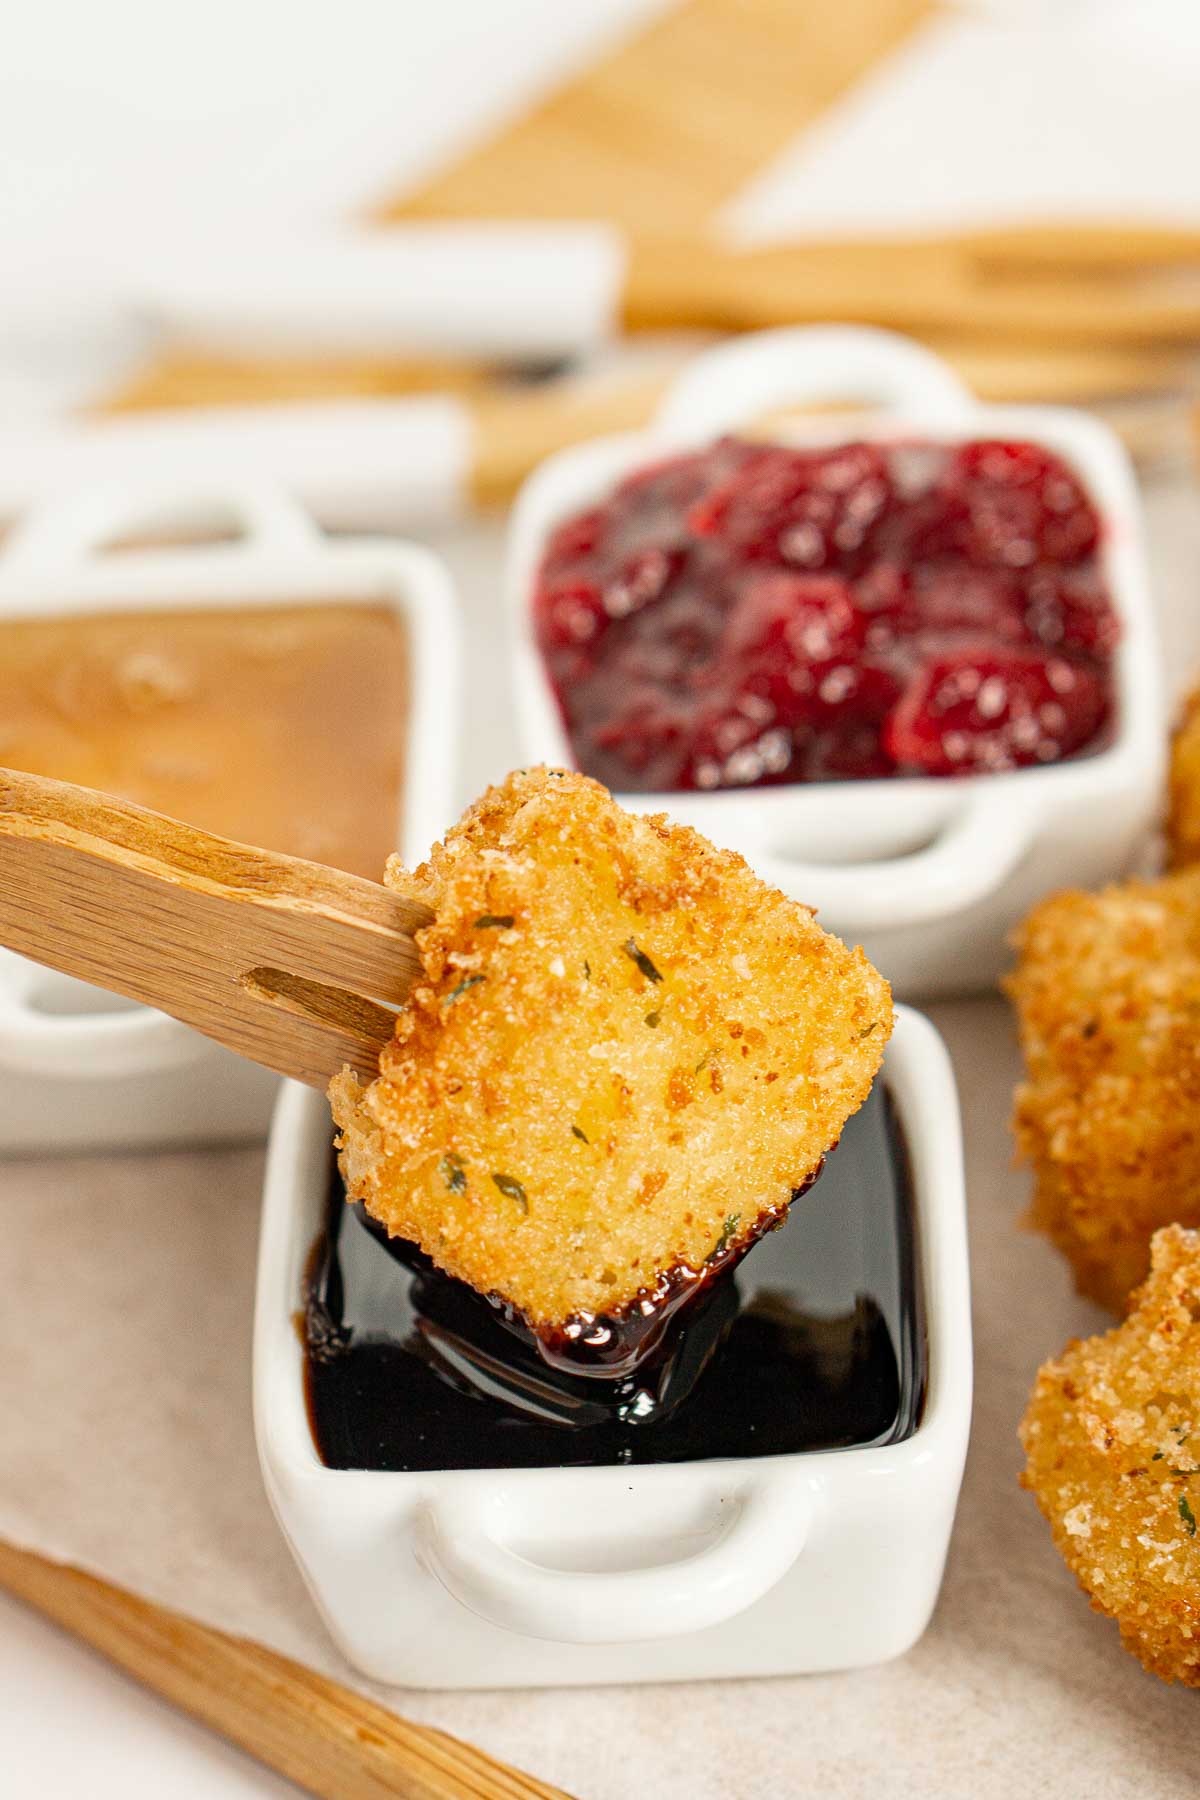 Dipping fried brie into balsamic glaze